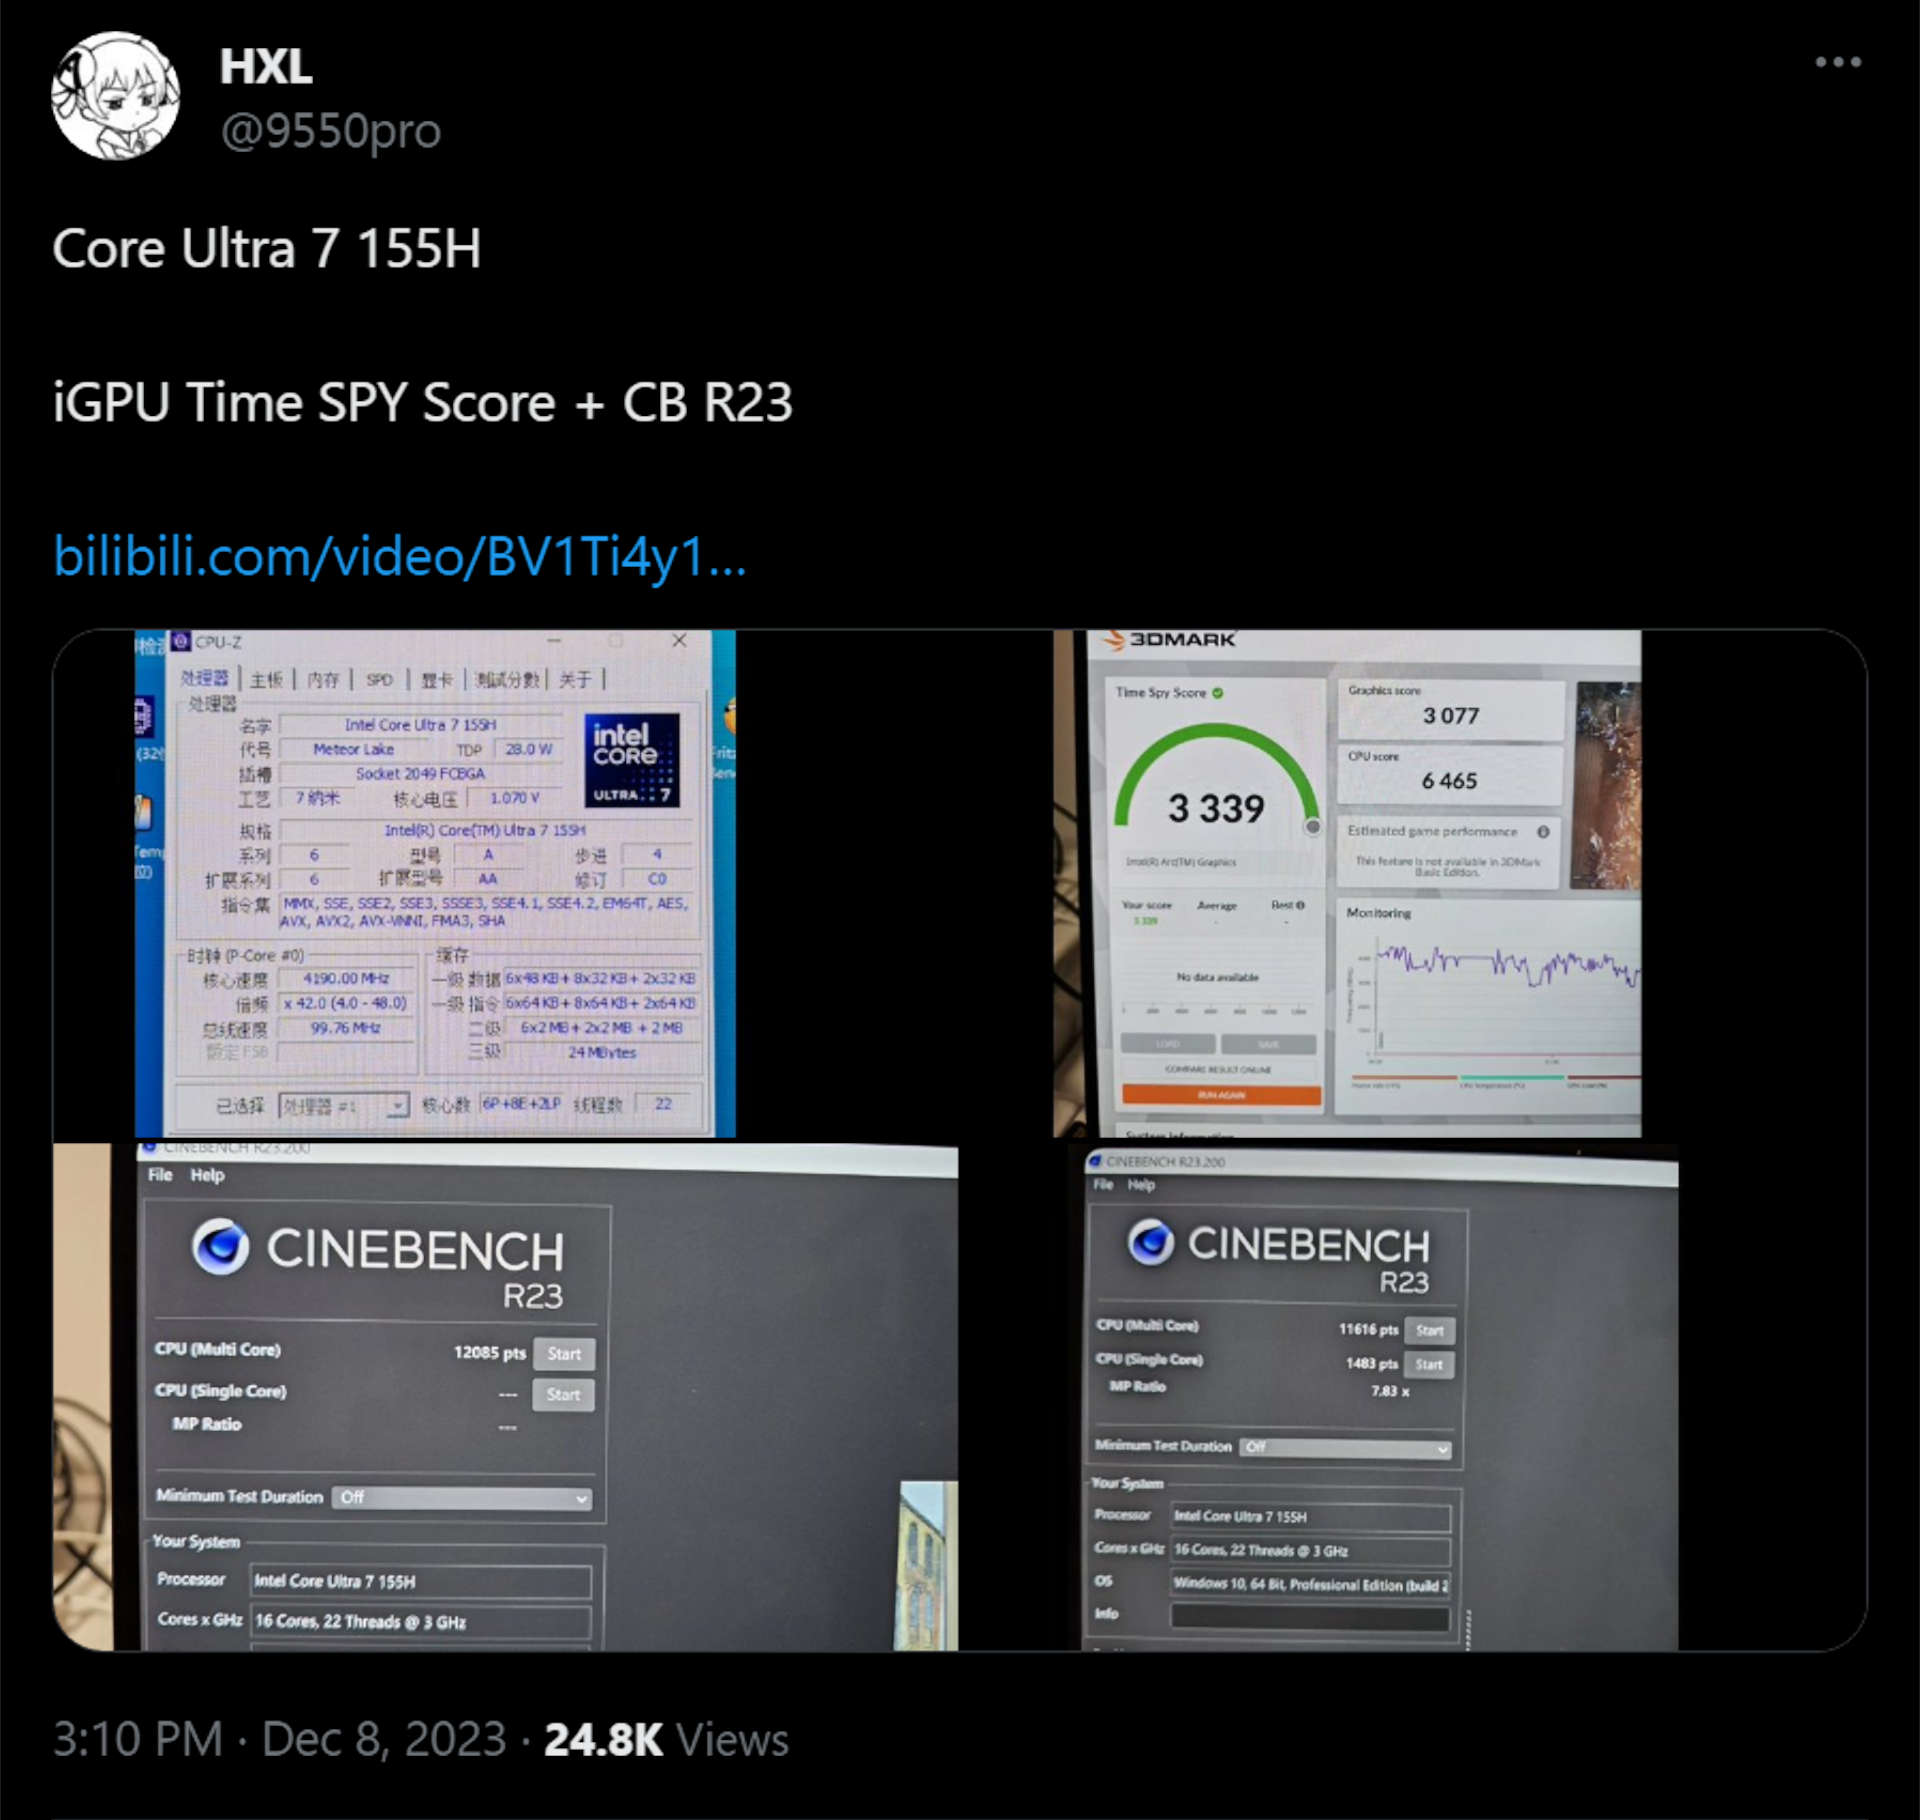 Screenshot of a Twitter post, with alleged leaks of Intel Core 7 Ultra 155H benchmark results